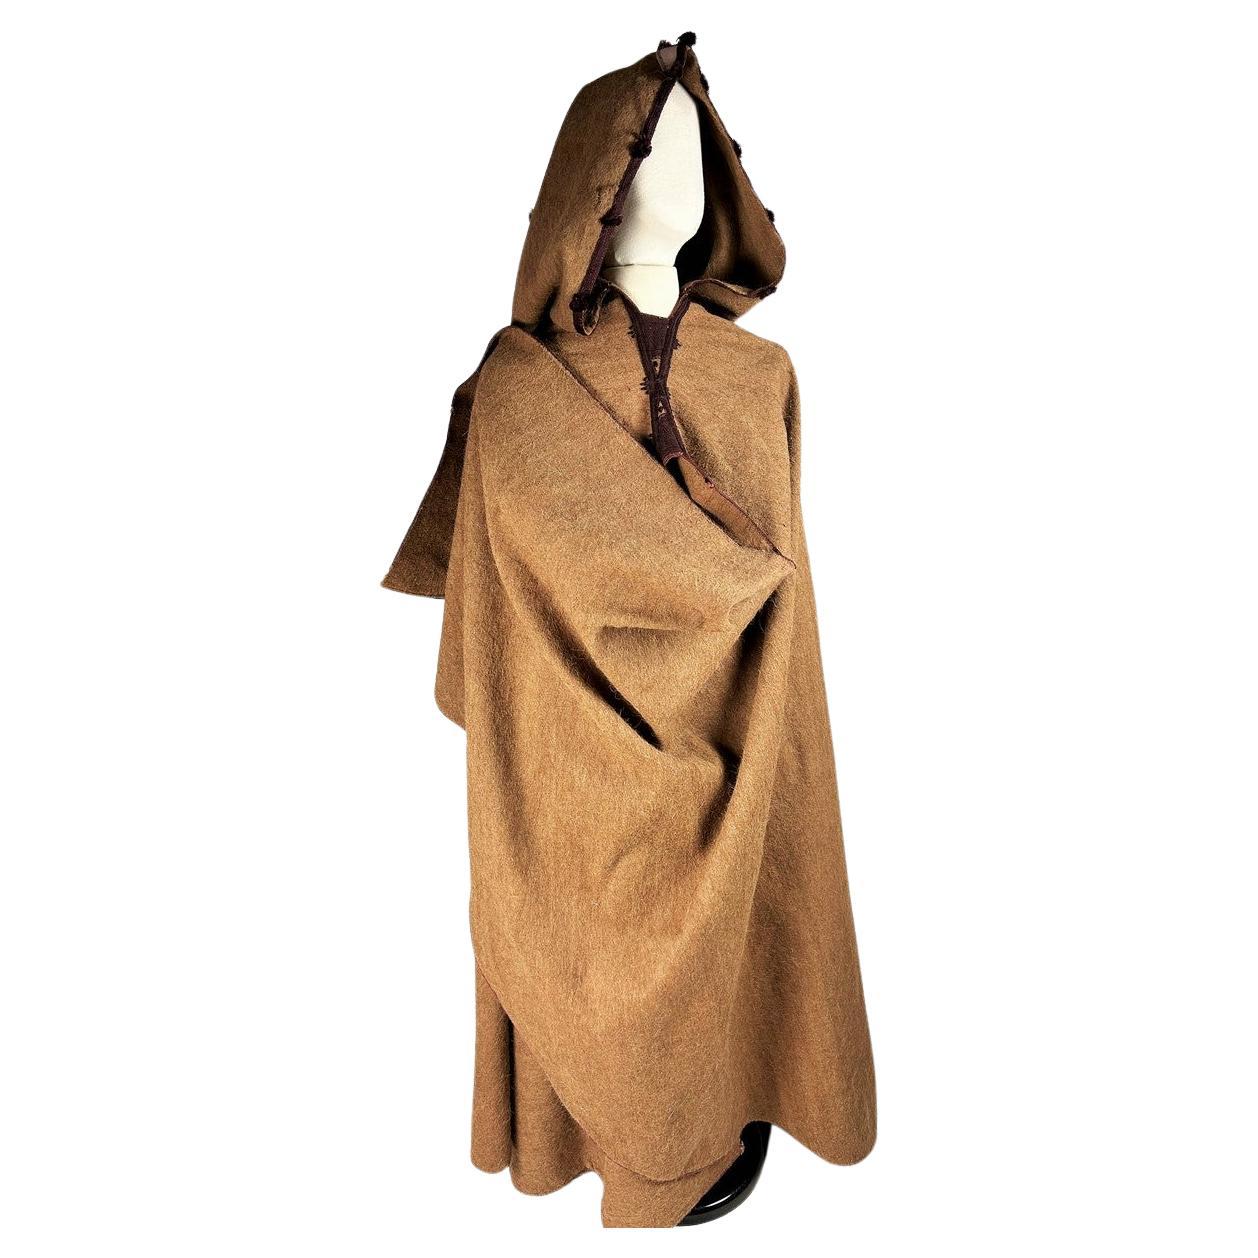 What is a camel hair coat?